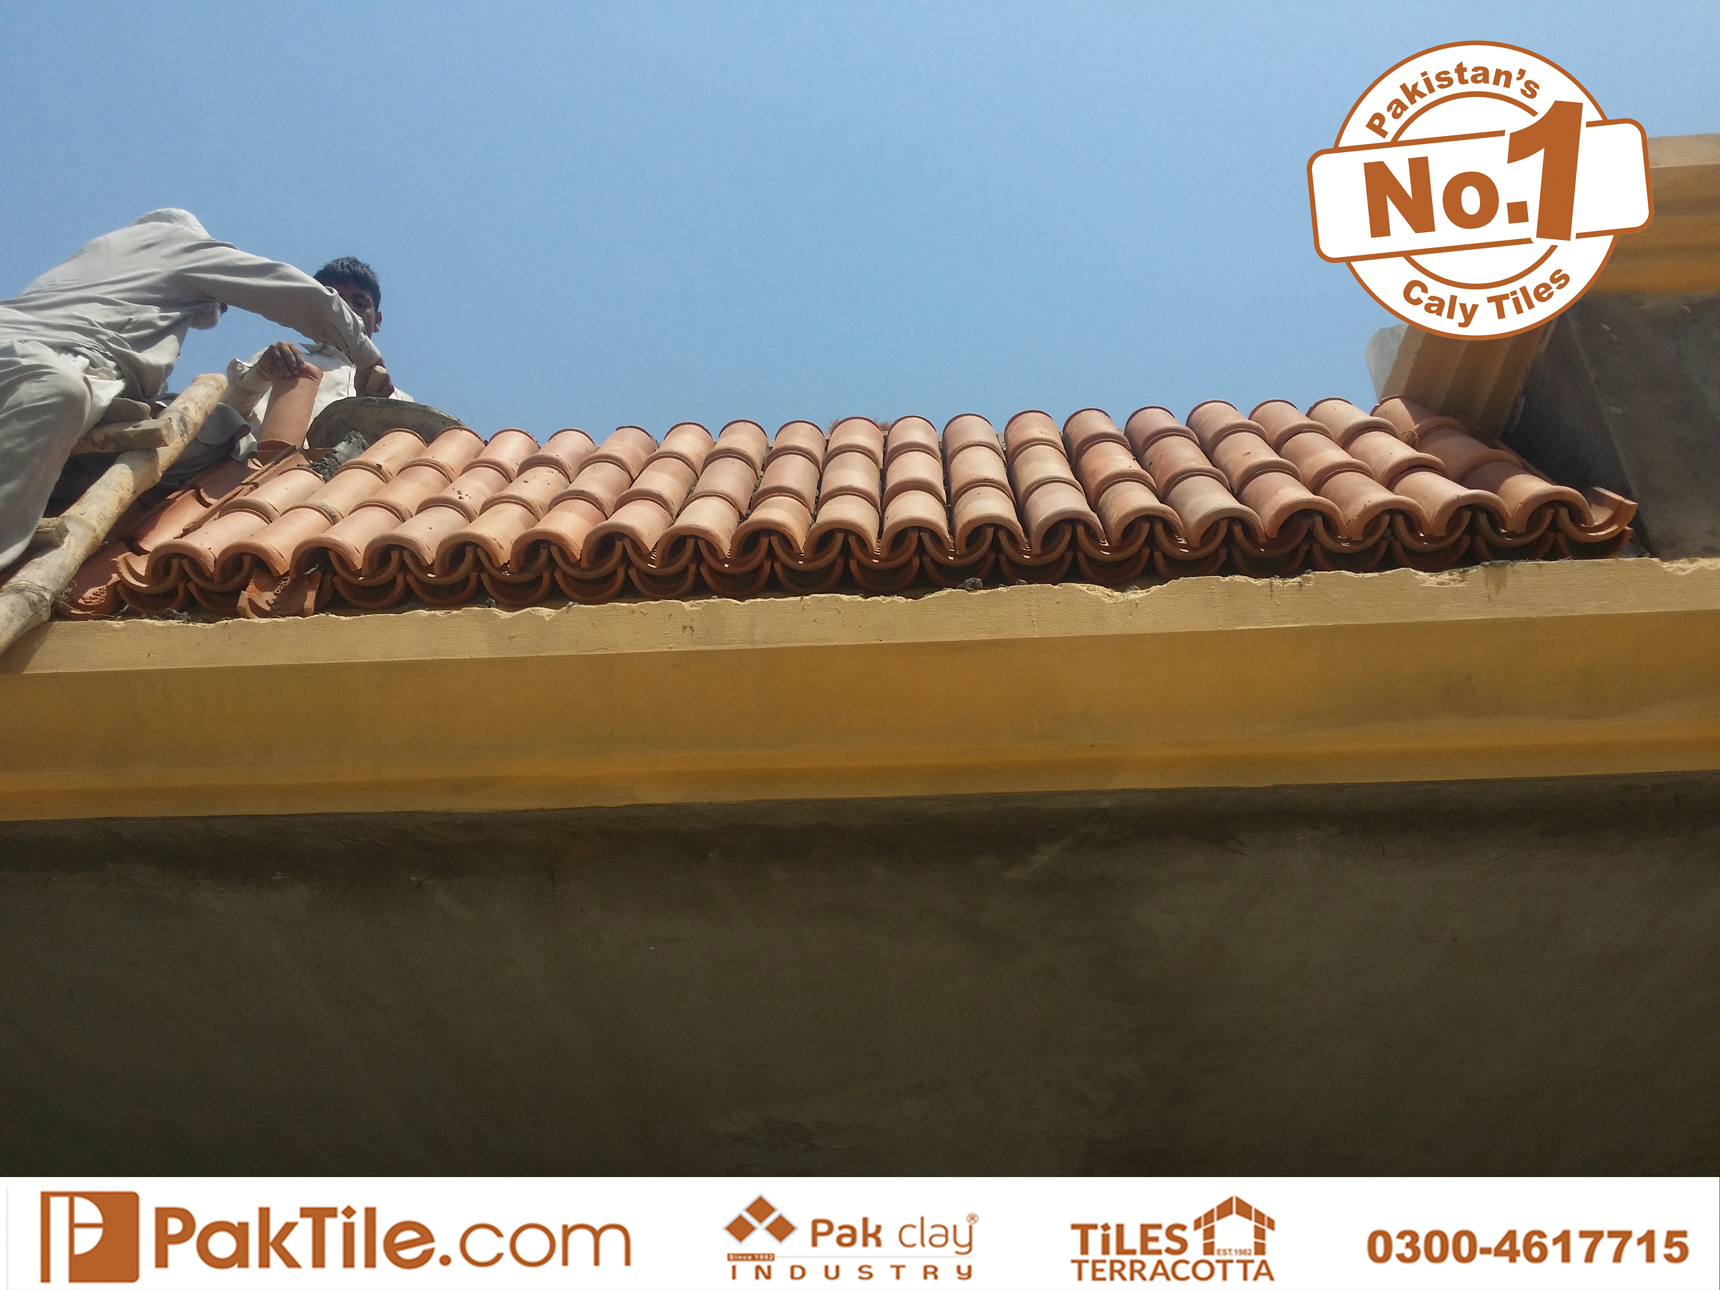 1 Terracotta Pak Clay Industry How to Install Khaprail Tiles Roof Tiles Design Types in Pakistan Images